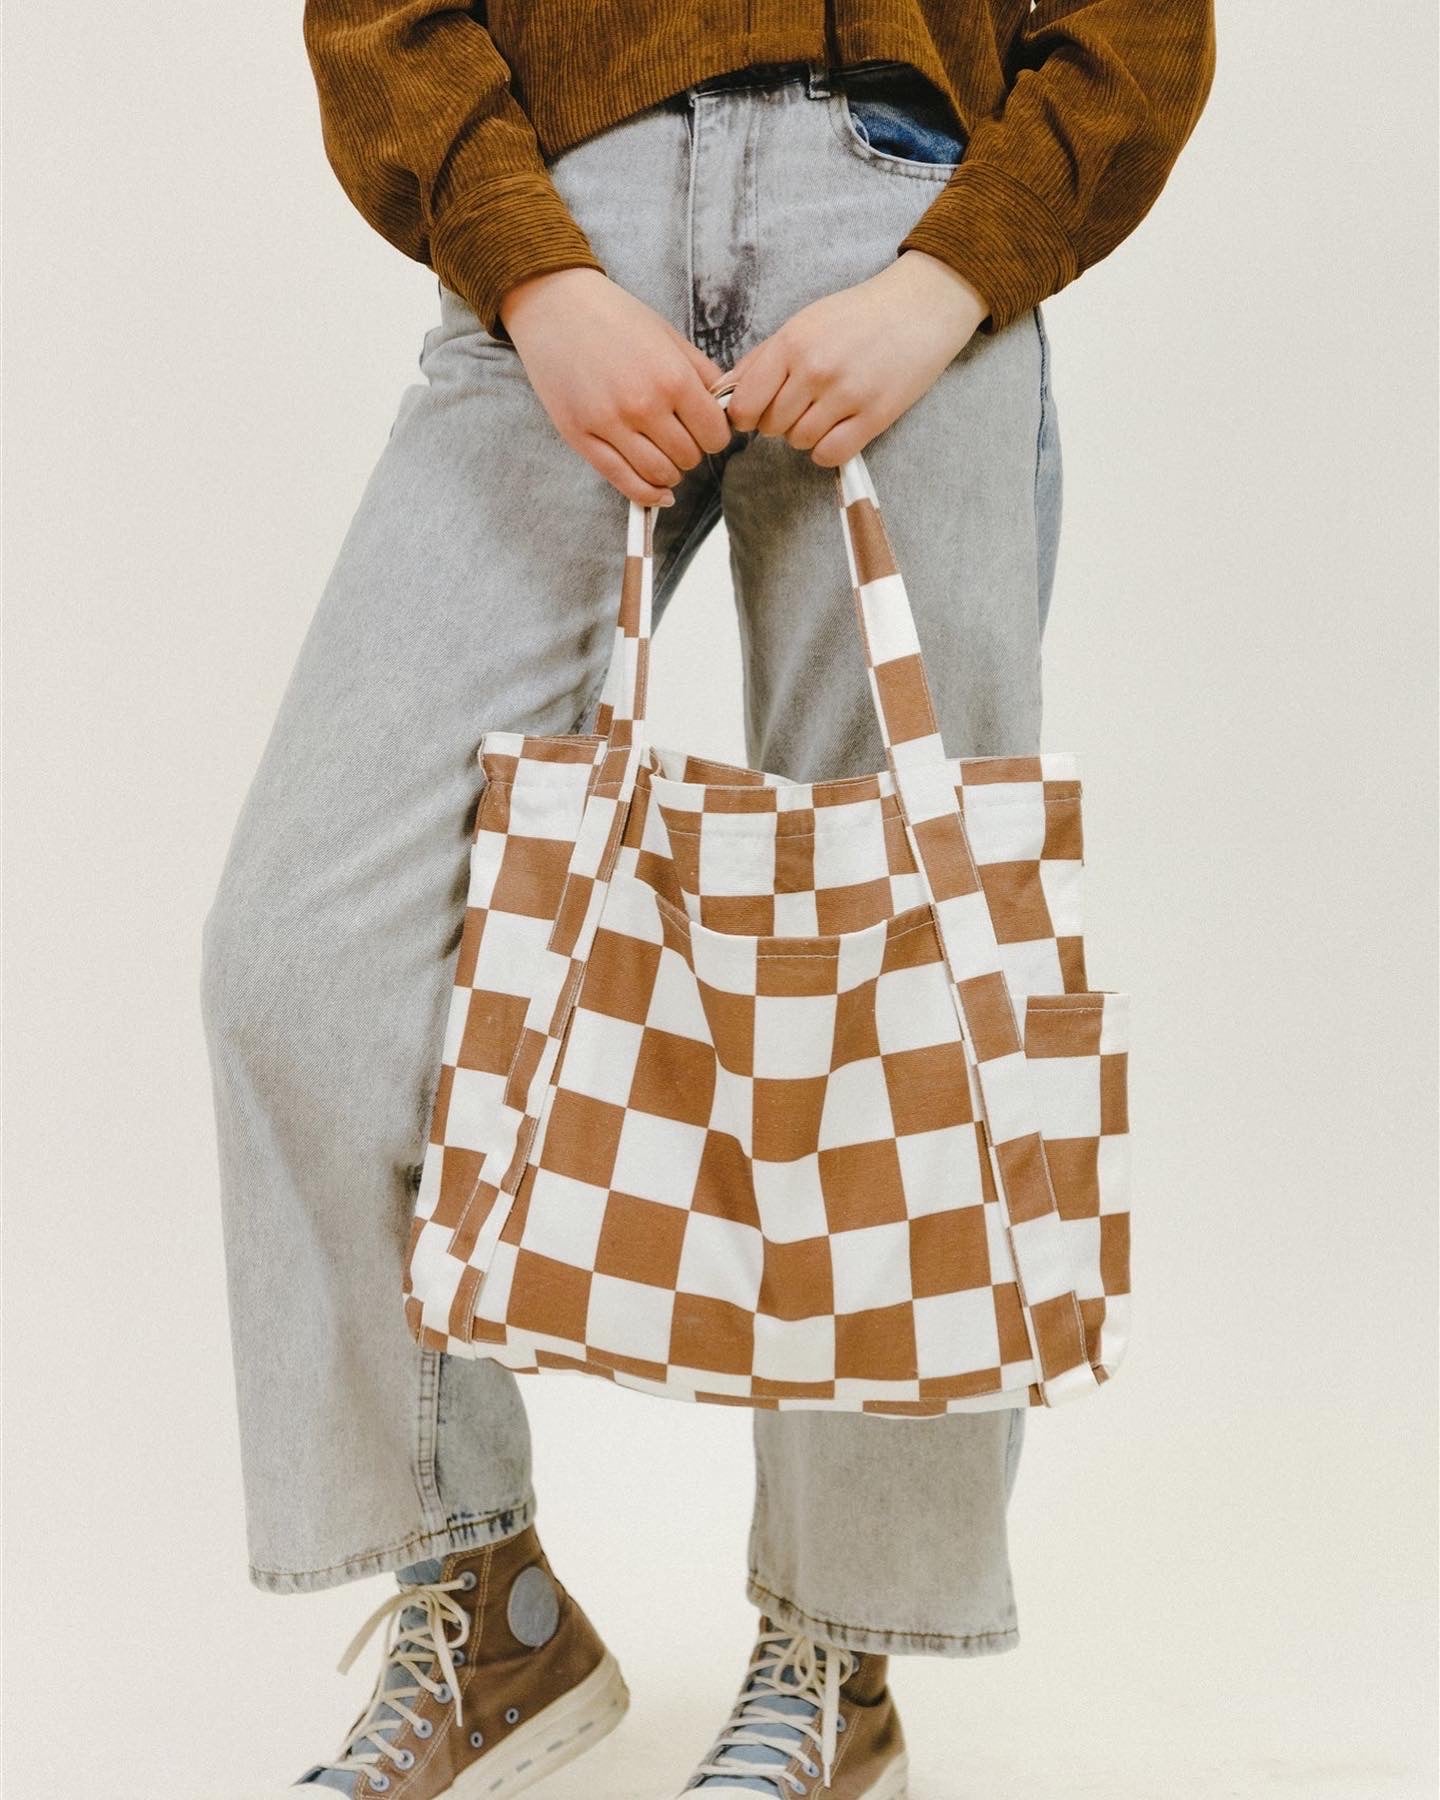 Brown Checkered Backpack/purse